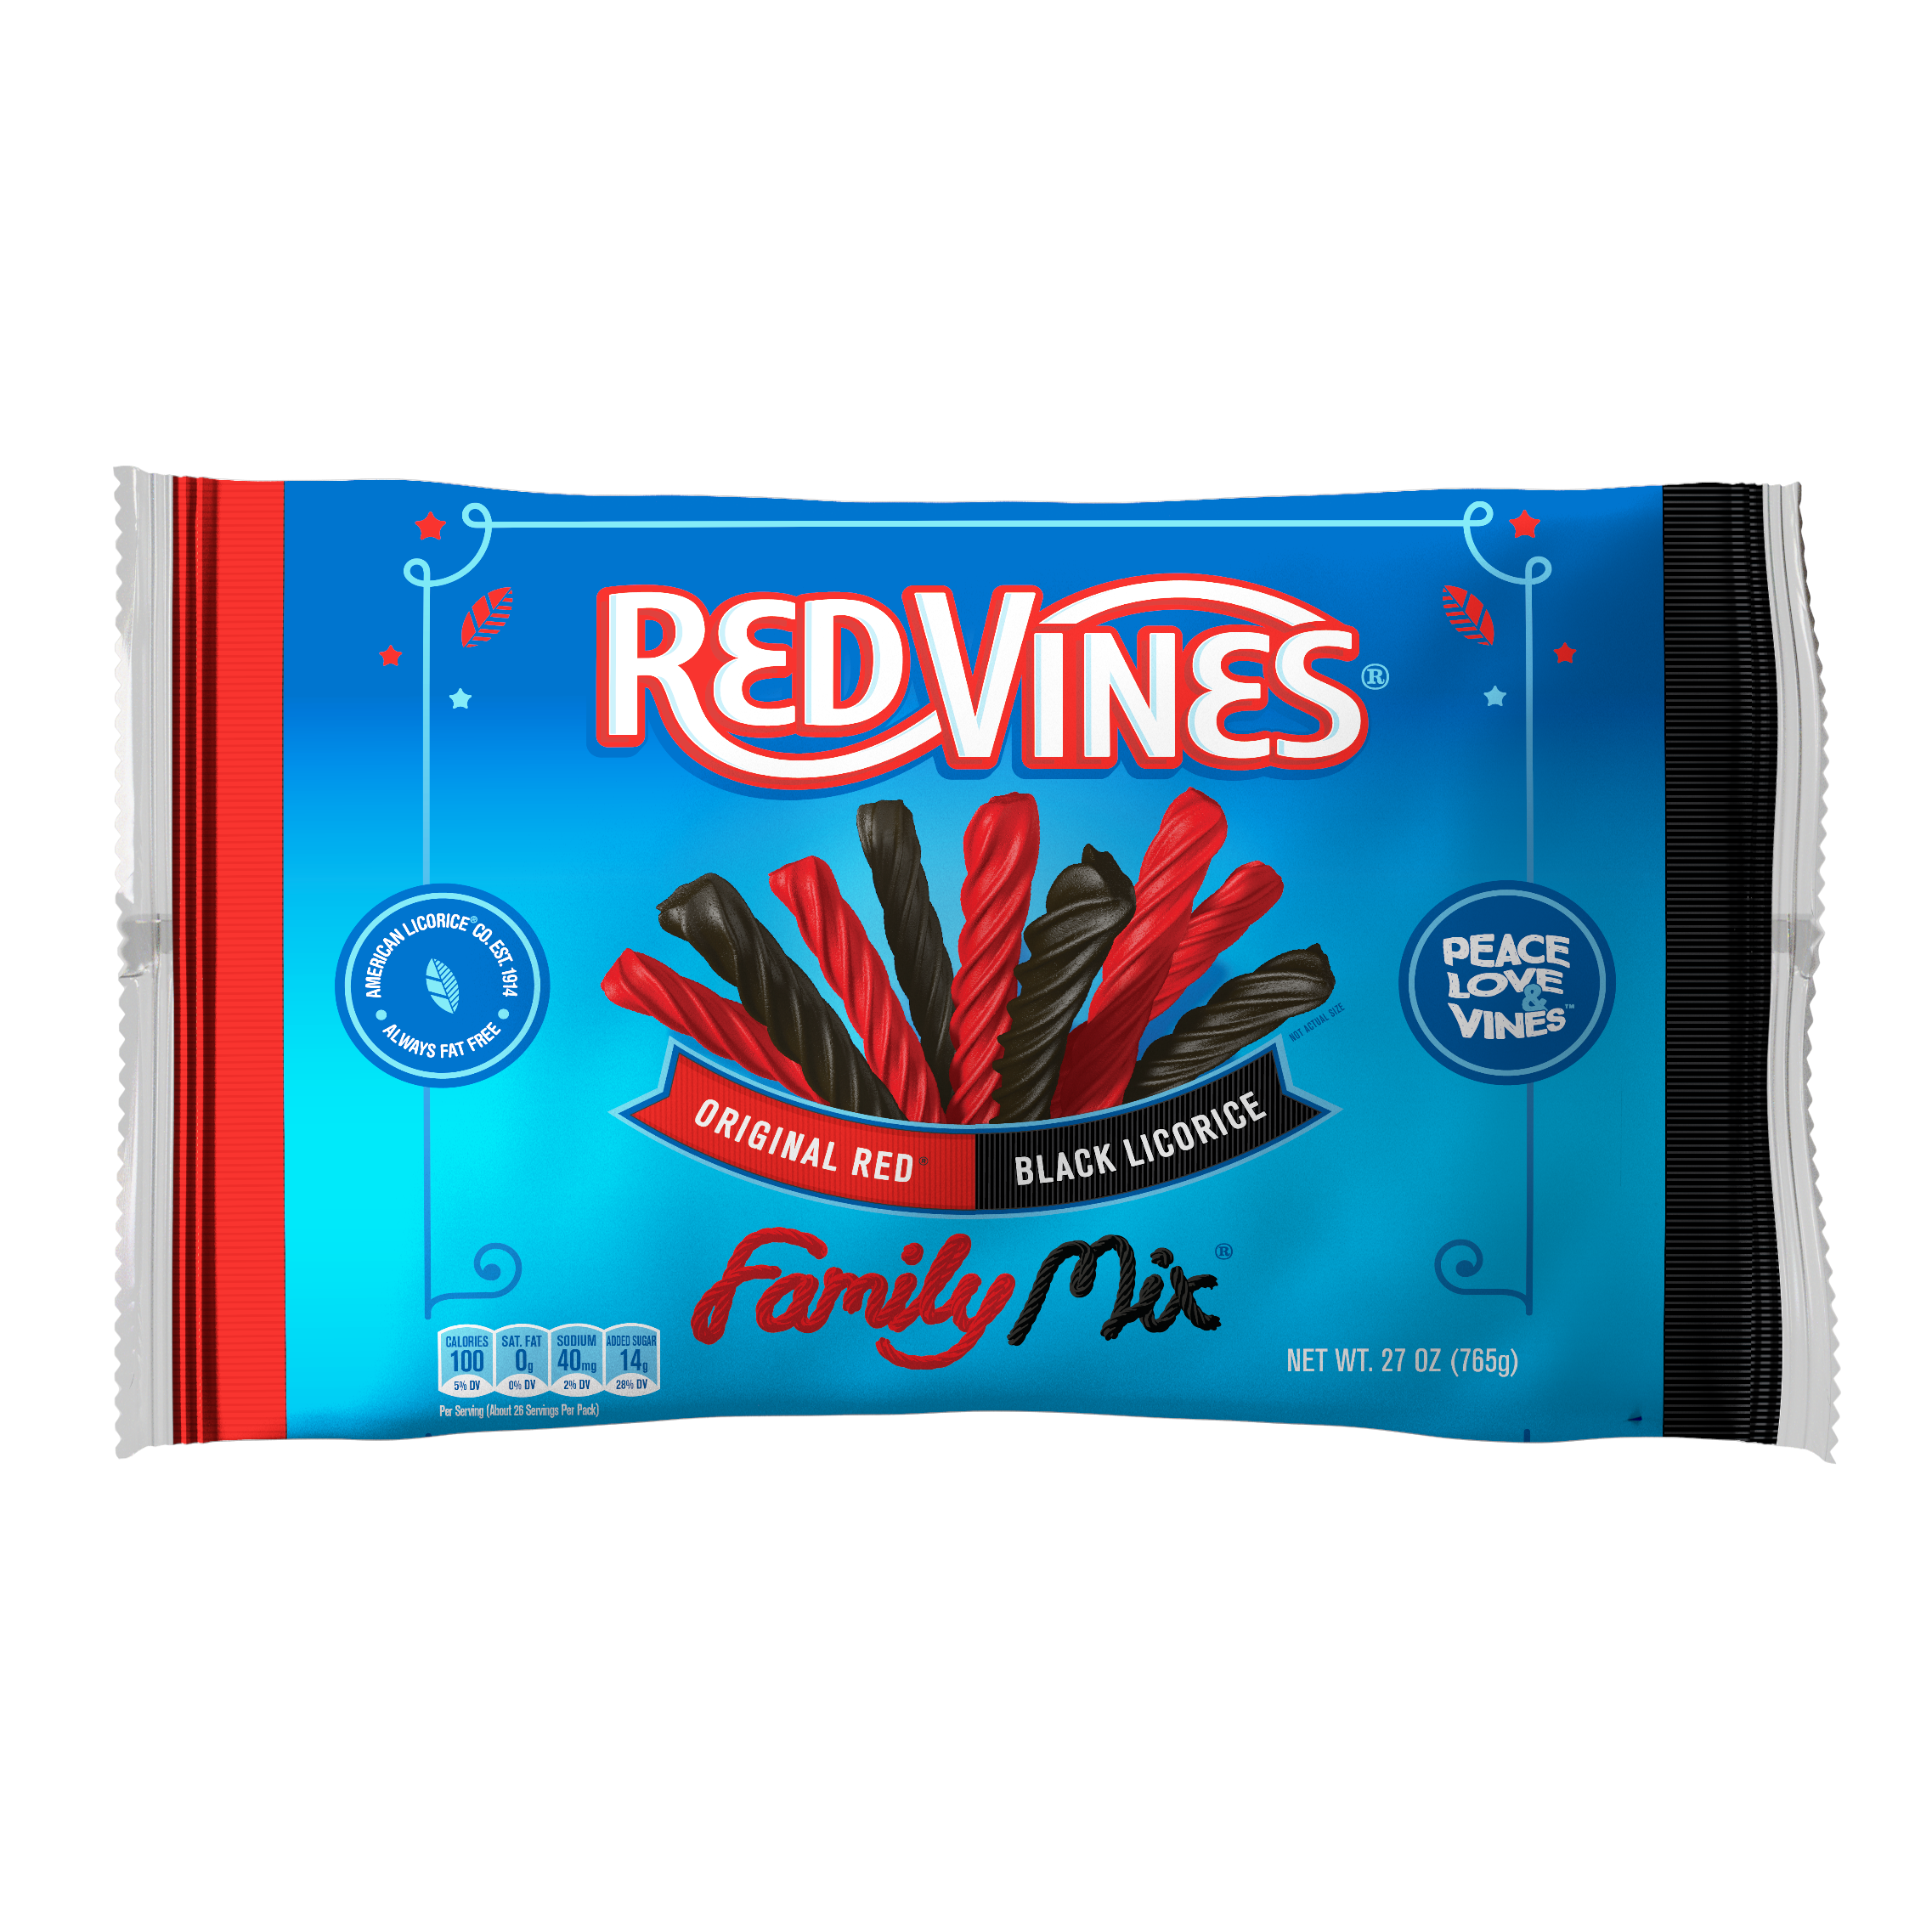 Red Vines Twists Family Mix Red & Black Licorice Candy, 27oz - image 1 of 8